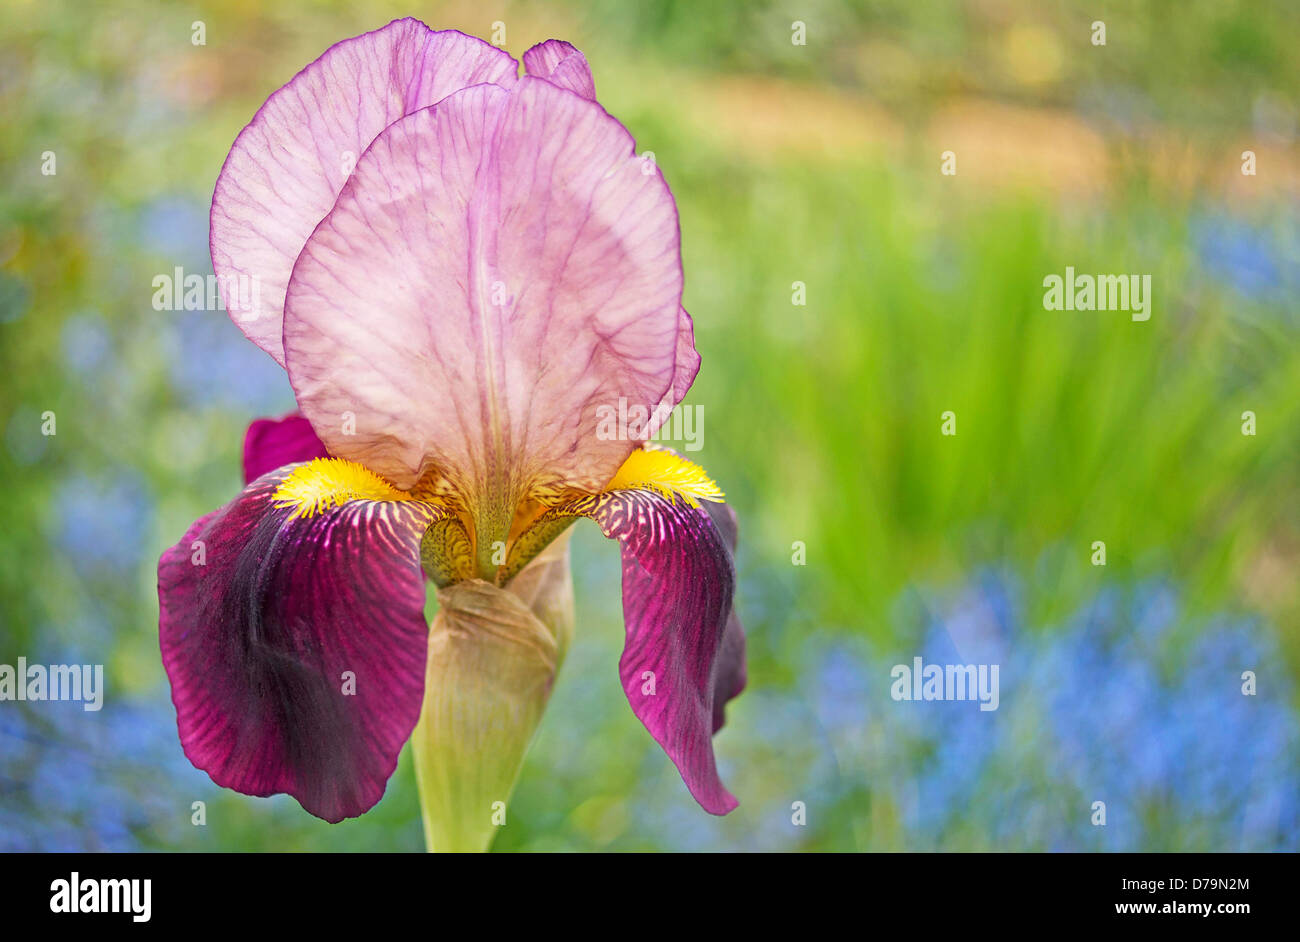 Bearded iris, Single flower with bright yellow beard extending along centre of purple pendent petal or fall. Stock Photo